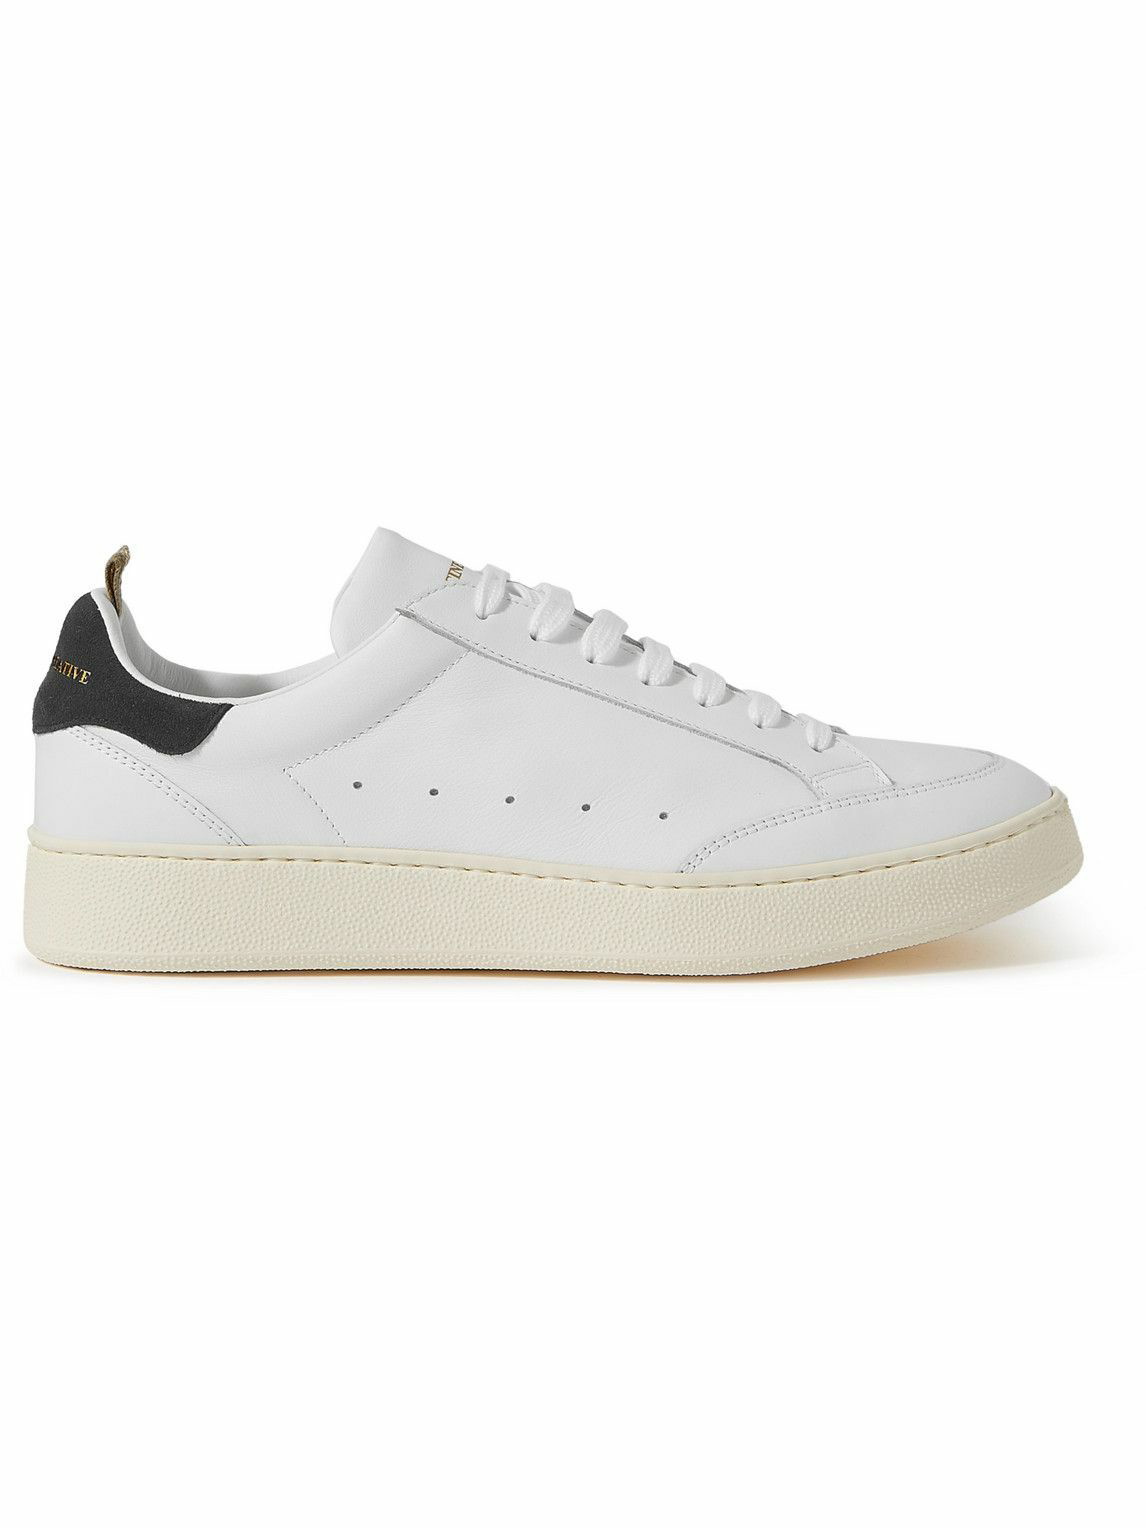 Officine Creative - Mower 007 Suede-Trimmed Leather Sneakers - White ...